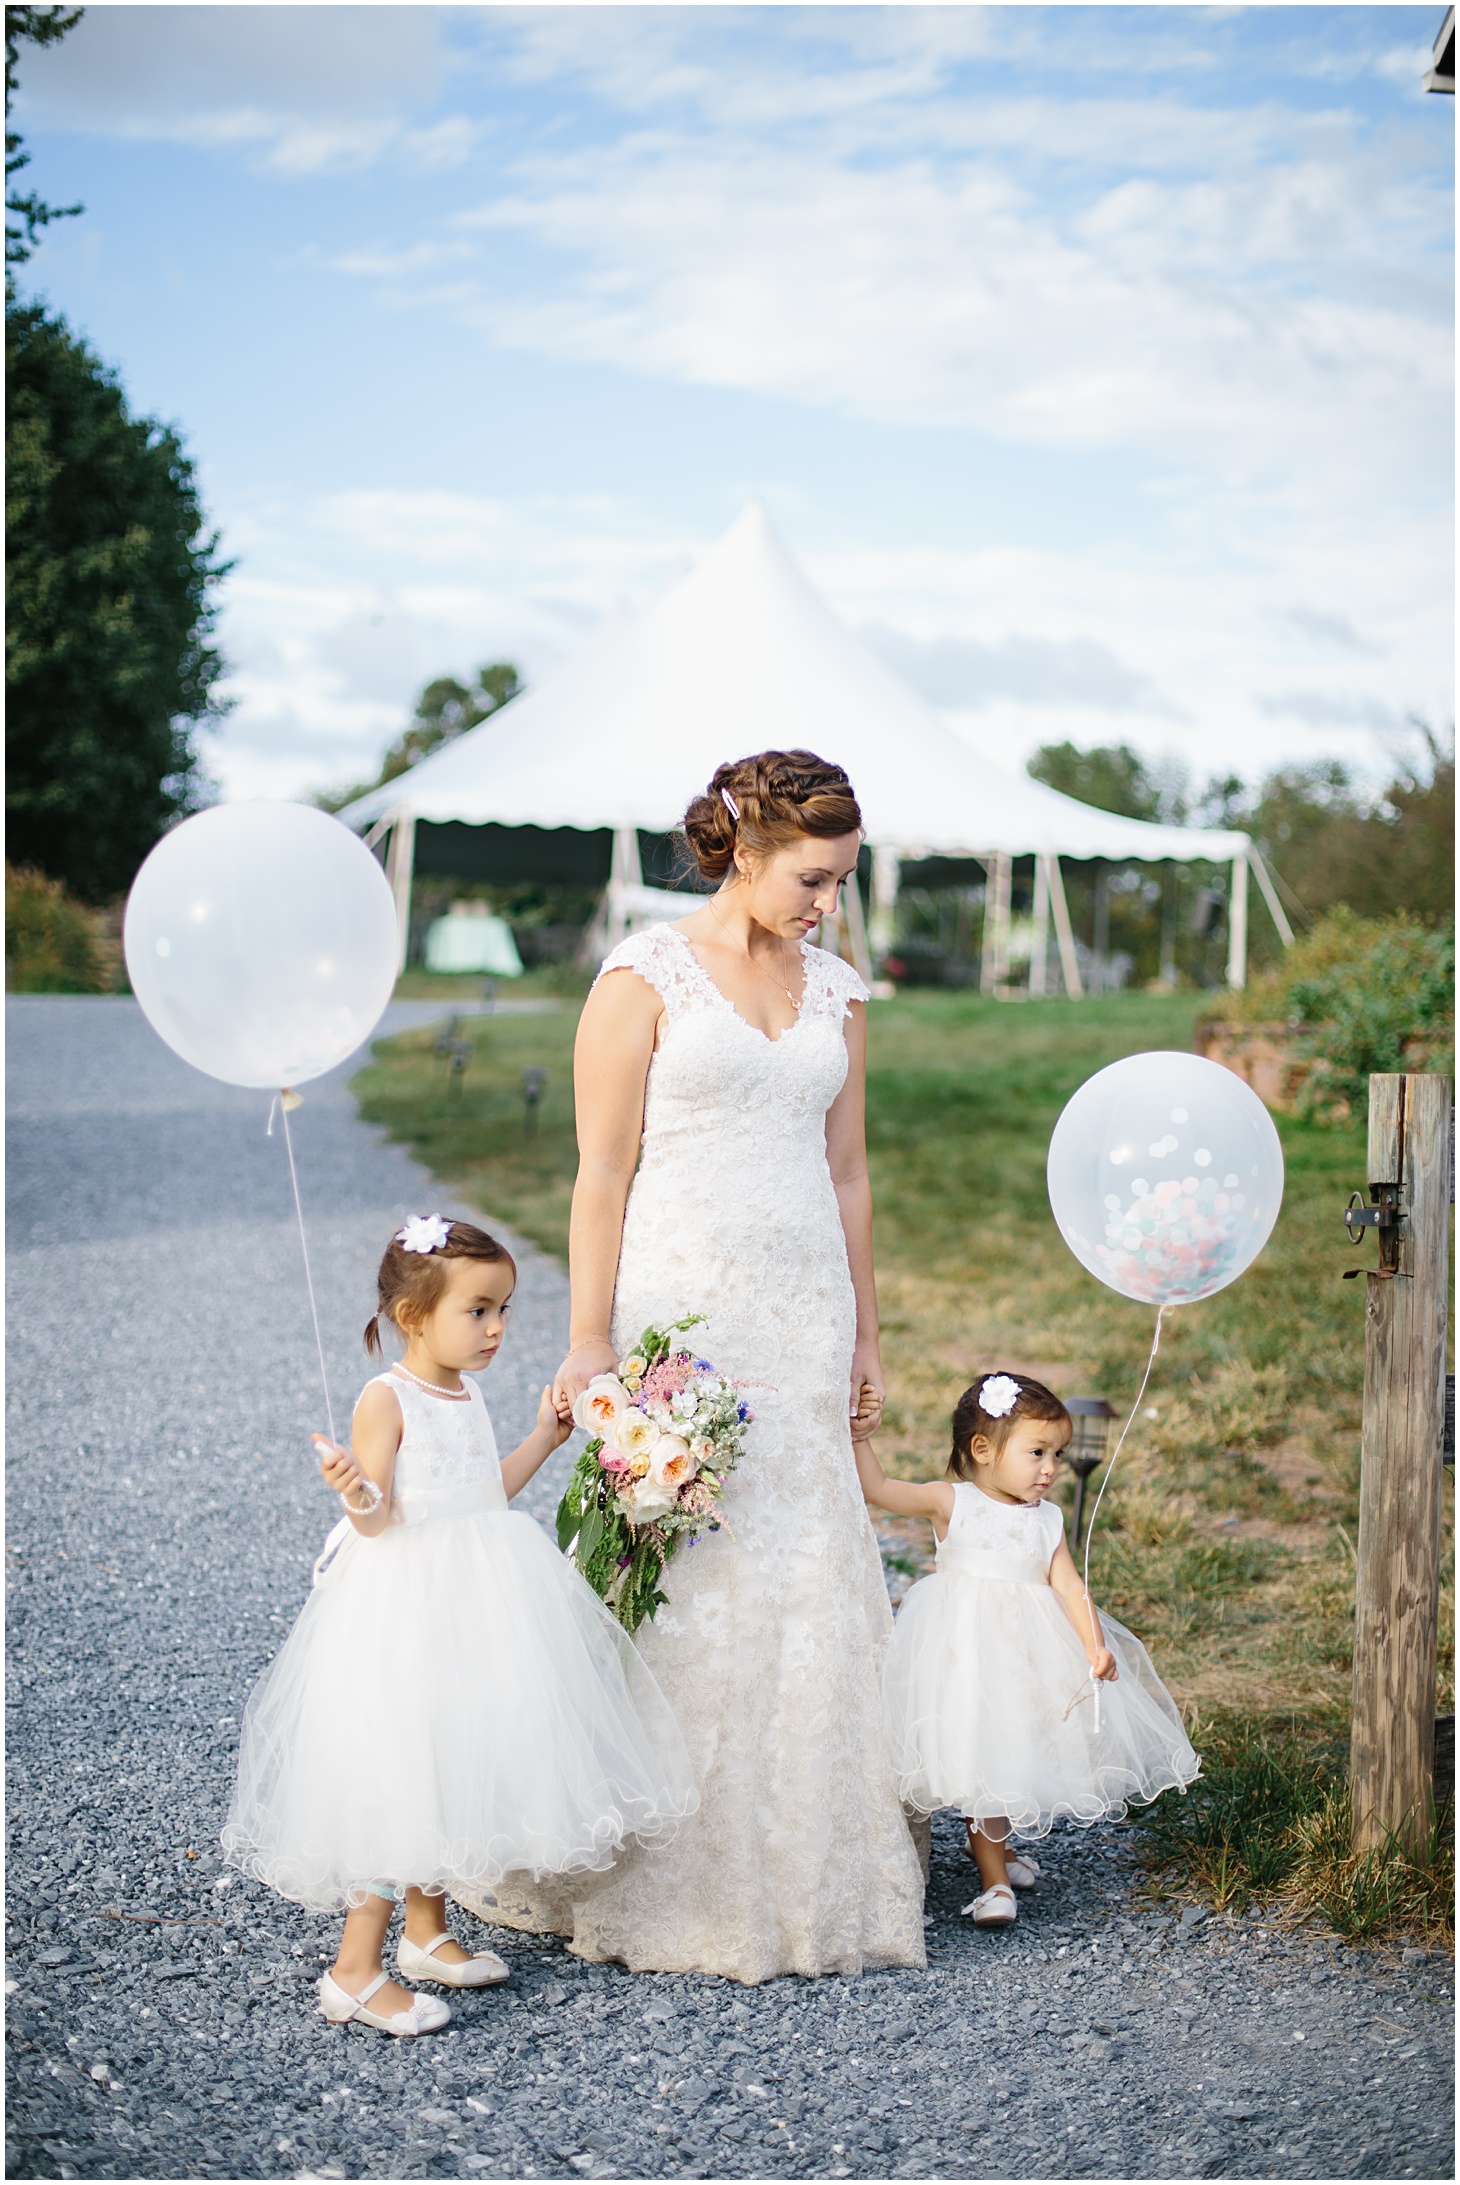 Rustic Floral Wedding at Rocklands Farm & Winery by Sarah Bradshaw Photography_0027